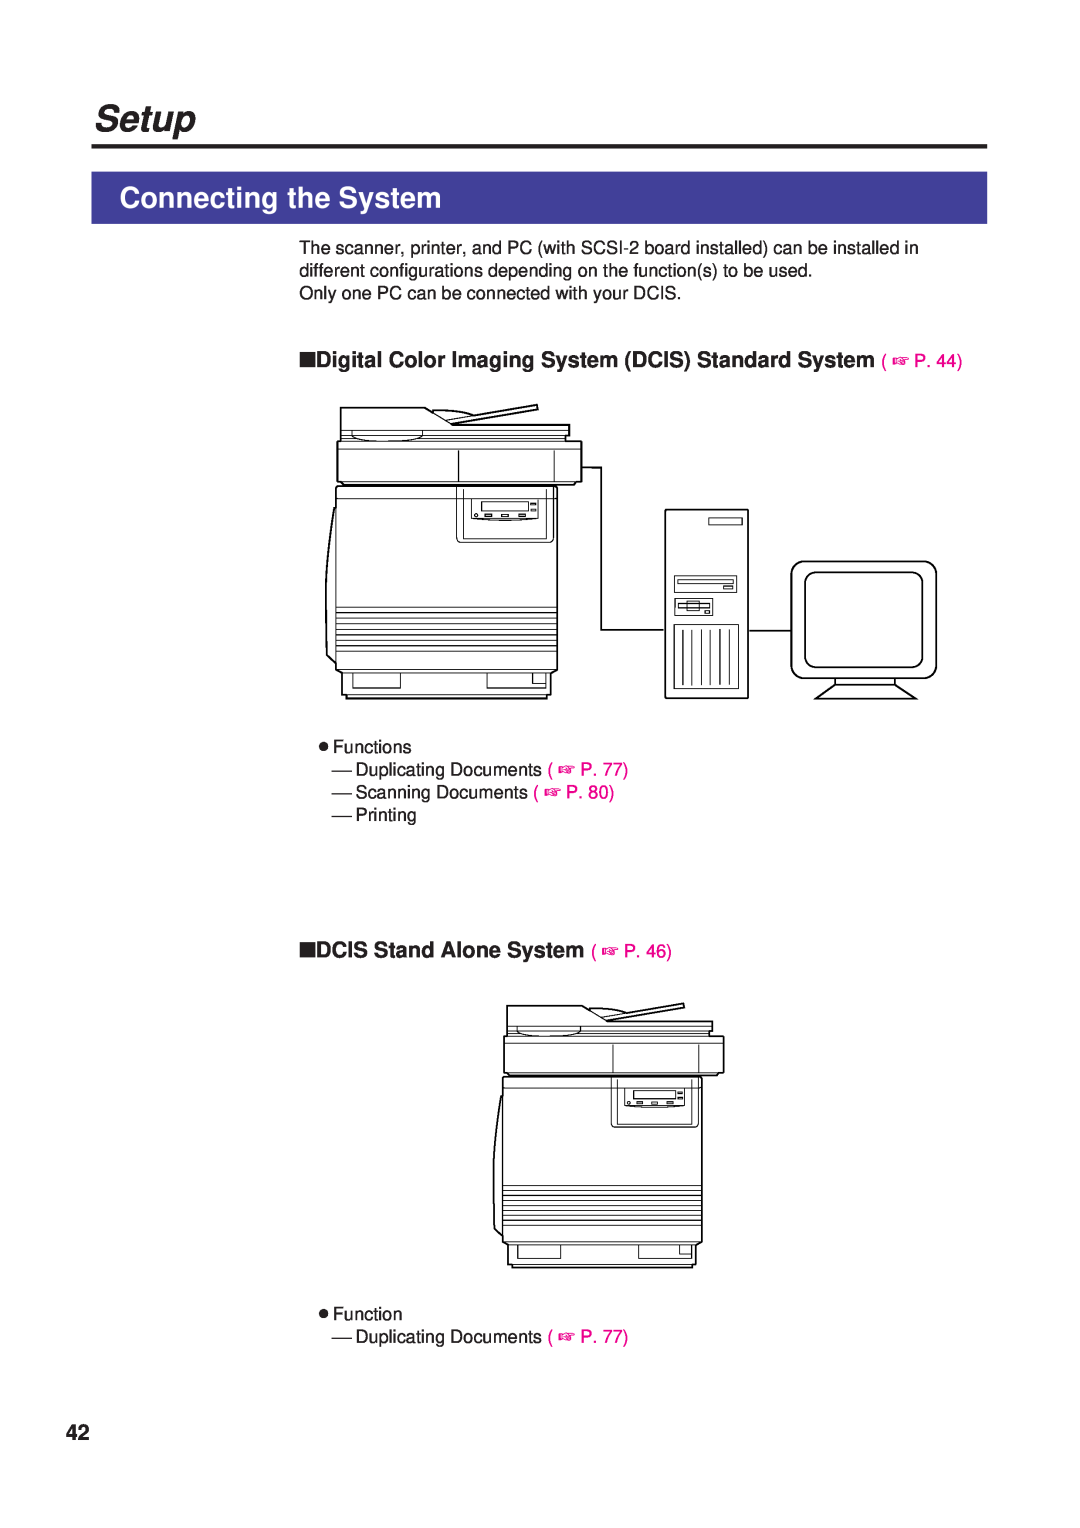 Panasonic KX-PS8000 Connecting the System, Digital Color Imaging System DCIS Standard System P, DCIS Stand Alone System P 